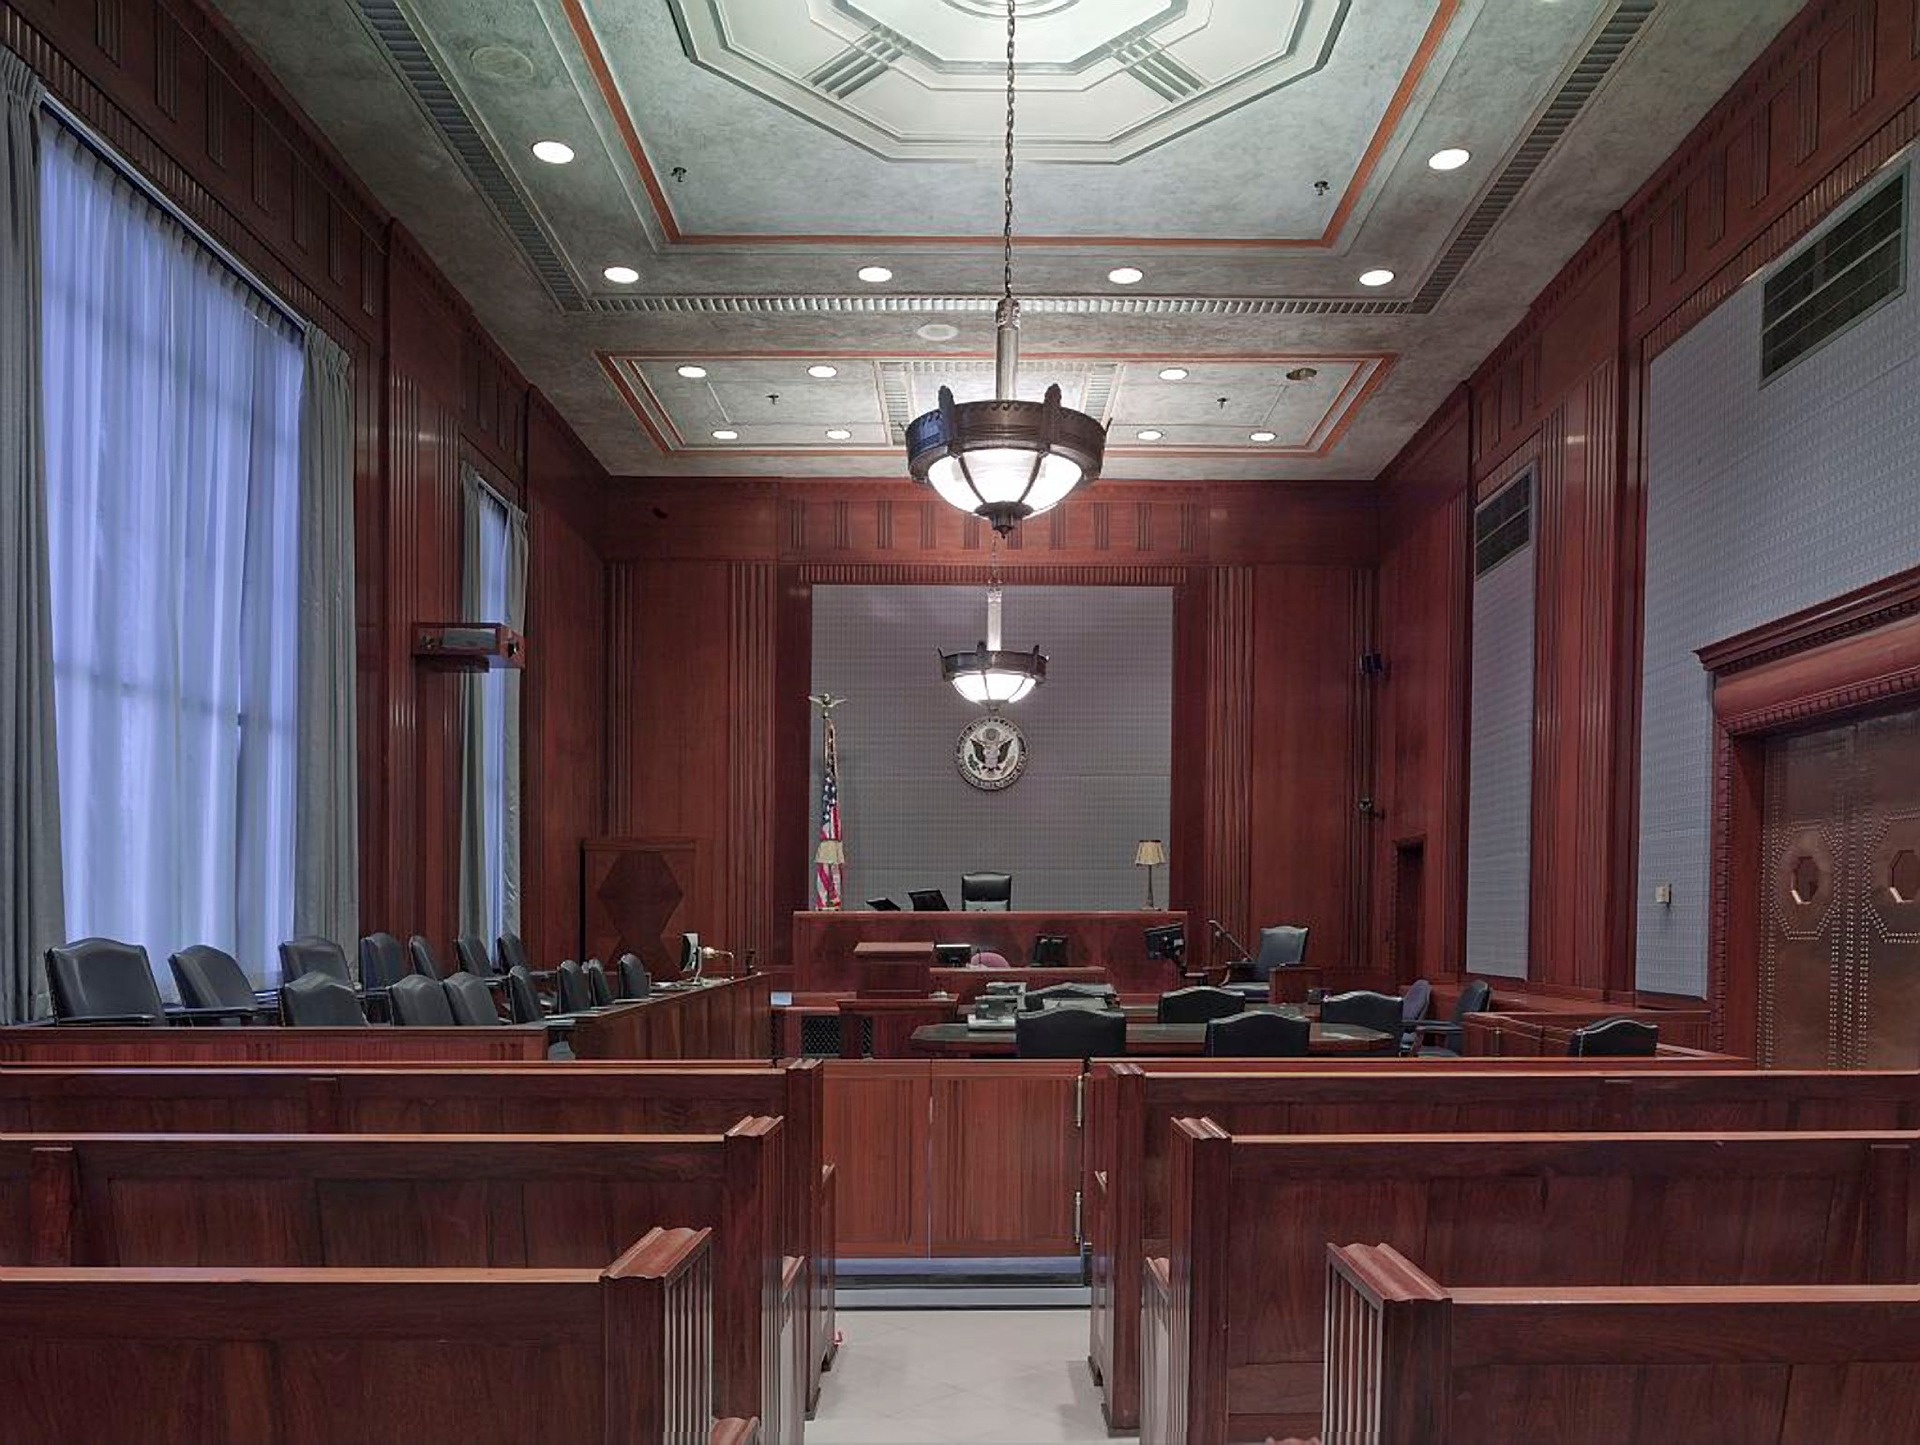 Interior of an empty courtroom showing judge's bench, witness stand, jury box, and spectator seating for a mediated divorce hearing. American flag and state seal are visible in the background.